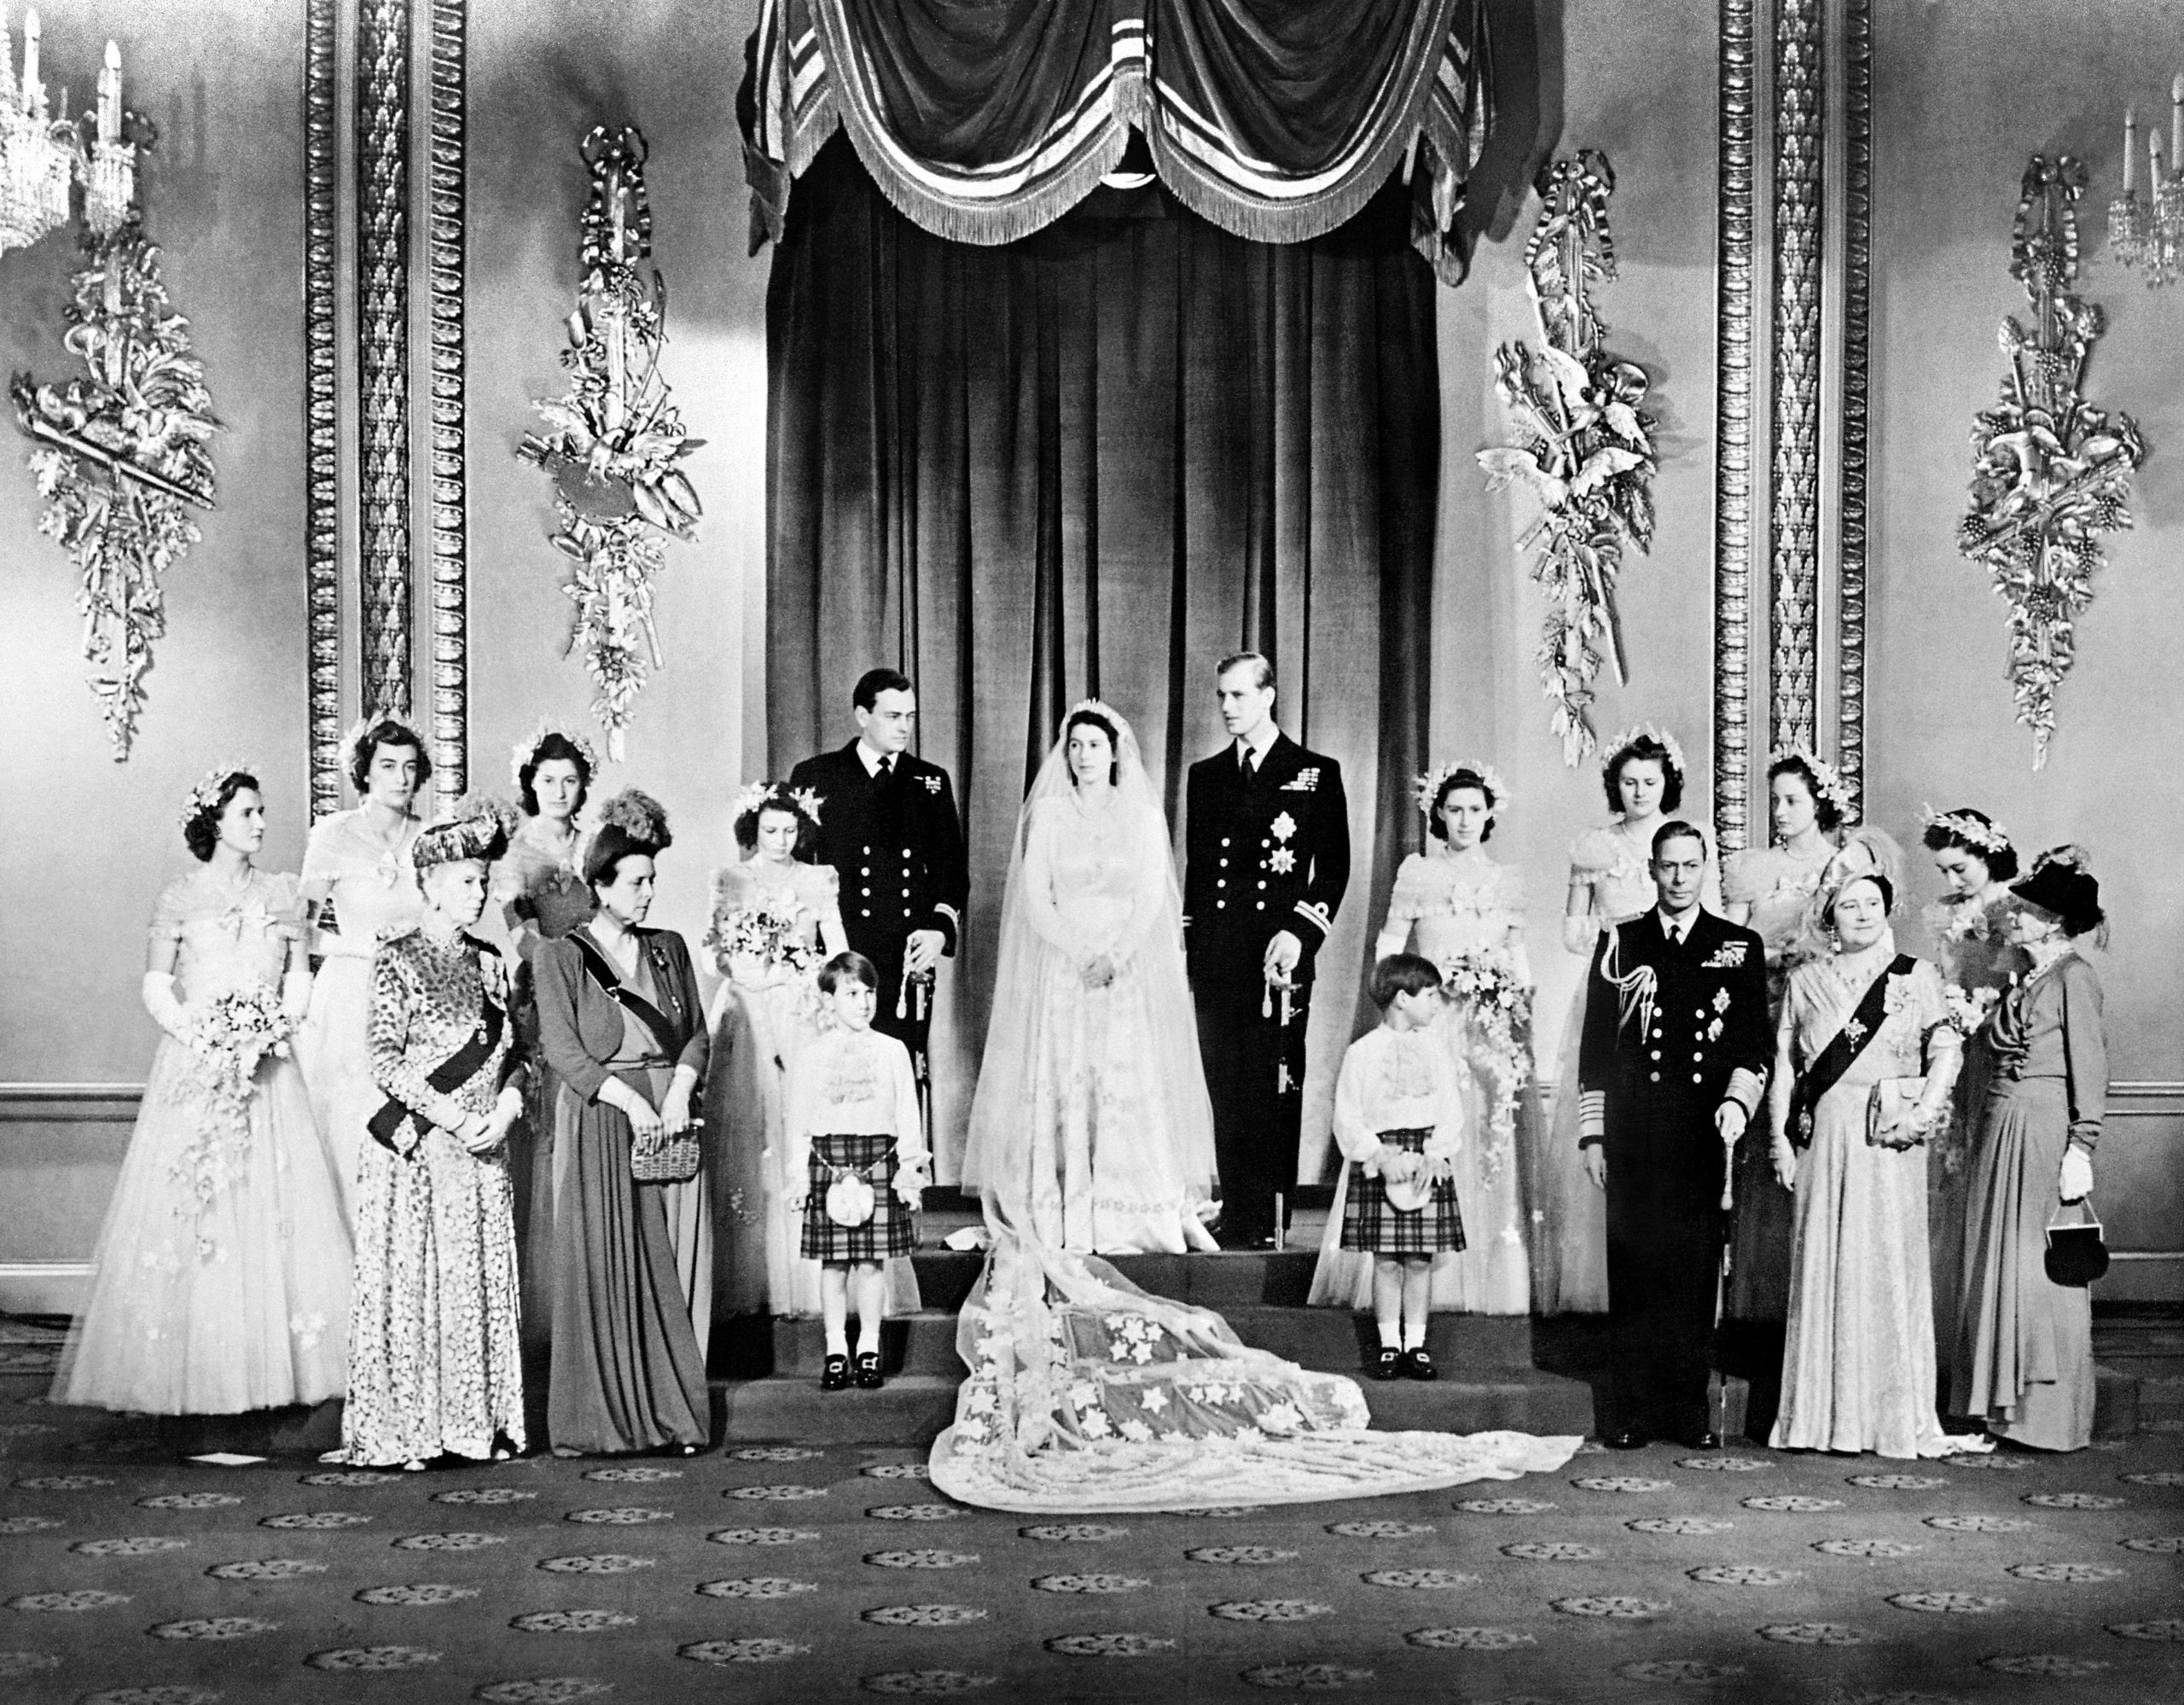 Members of the British Royal family and guests pose around Princess Elizabeth (future Queen Elizabeth II) (CL) and Philip, Duke of Edinburgh (CR) (future Prince Philip); at right the group includes Britain's King George VI (5R) stood next to Queen Elizabeth (3R) with Princess Alice of Athlone (R) and in front of bridemaids that include Princess Margaretb (7R) stood next to Philip; at left the group includes the best man David Mountbatten, Marquess of Milford Haven (7L) stood next to Princess Elizabeth, Mary of Teck (3L), mother of King George VI, stands at left in front of the bridesmaids next to Princess Alice of Battenberg (5L), Philip's mother; the page boys are Prince William of Gloucester and Prince Michael of Kent; in the Throne Room at Buckingham Palace on their wedding day November 20, 1947